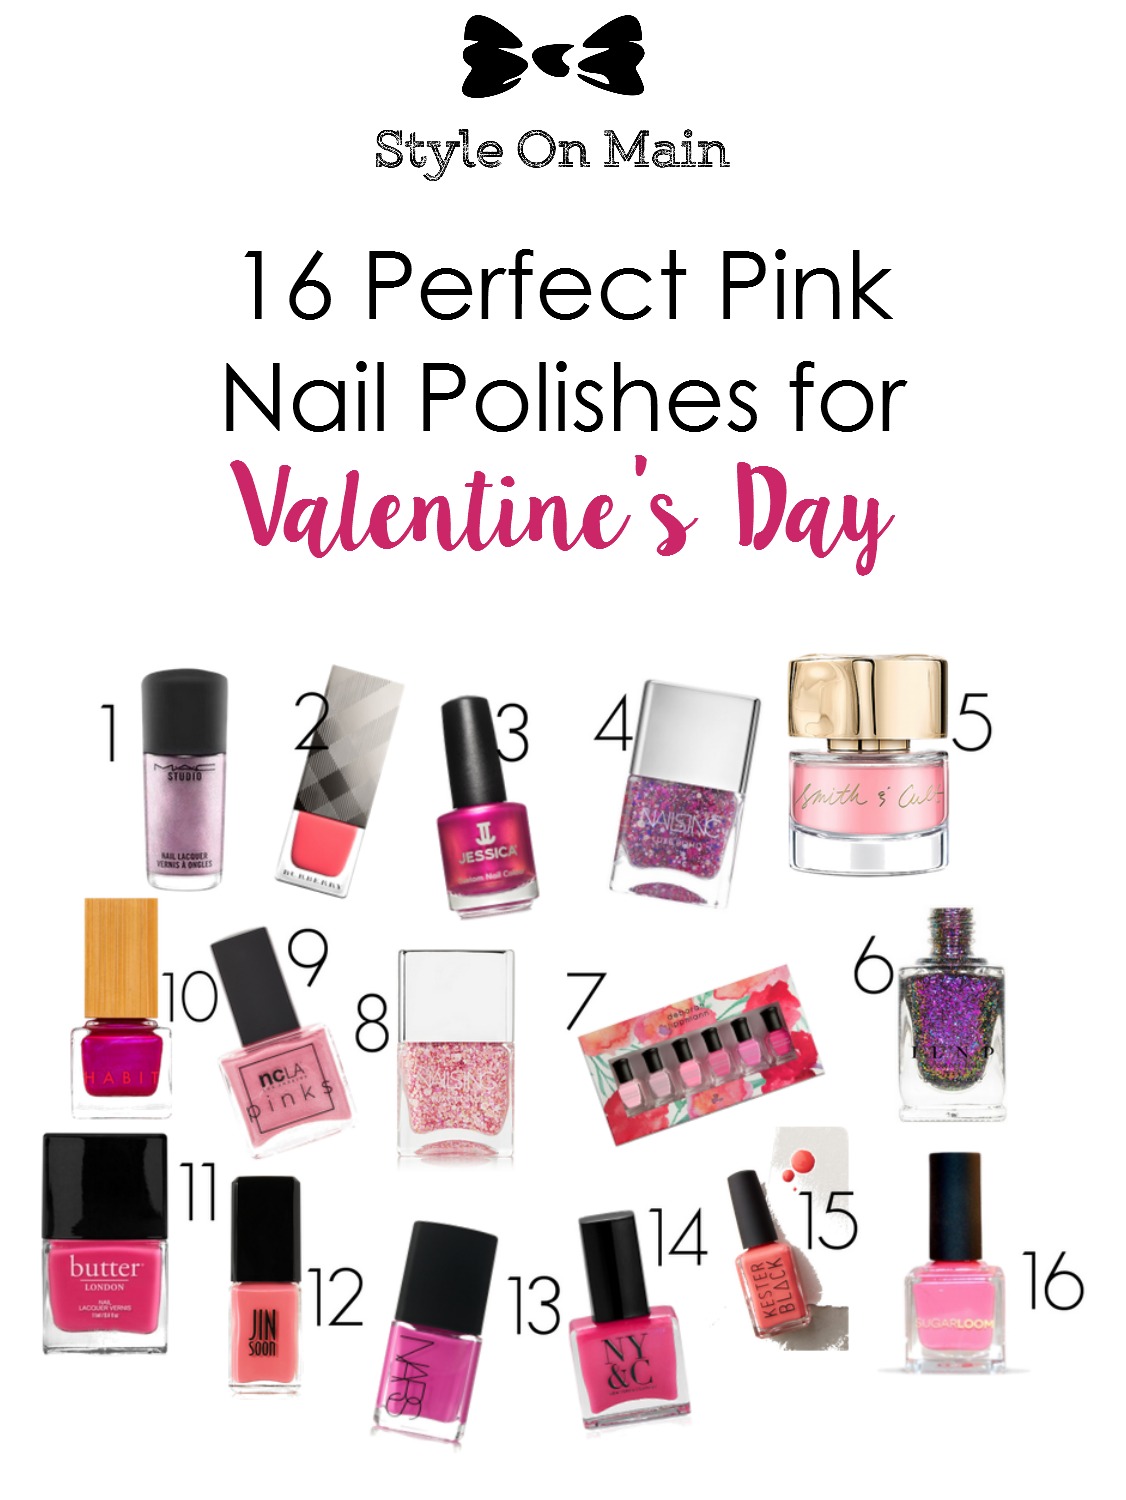 Gorgeous pink nail lacquers for valentine's day and beyond